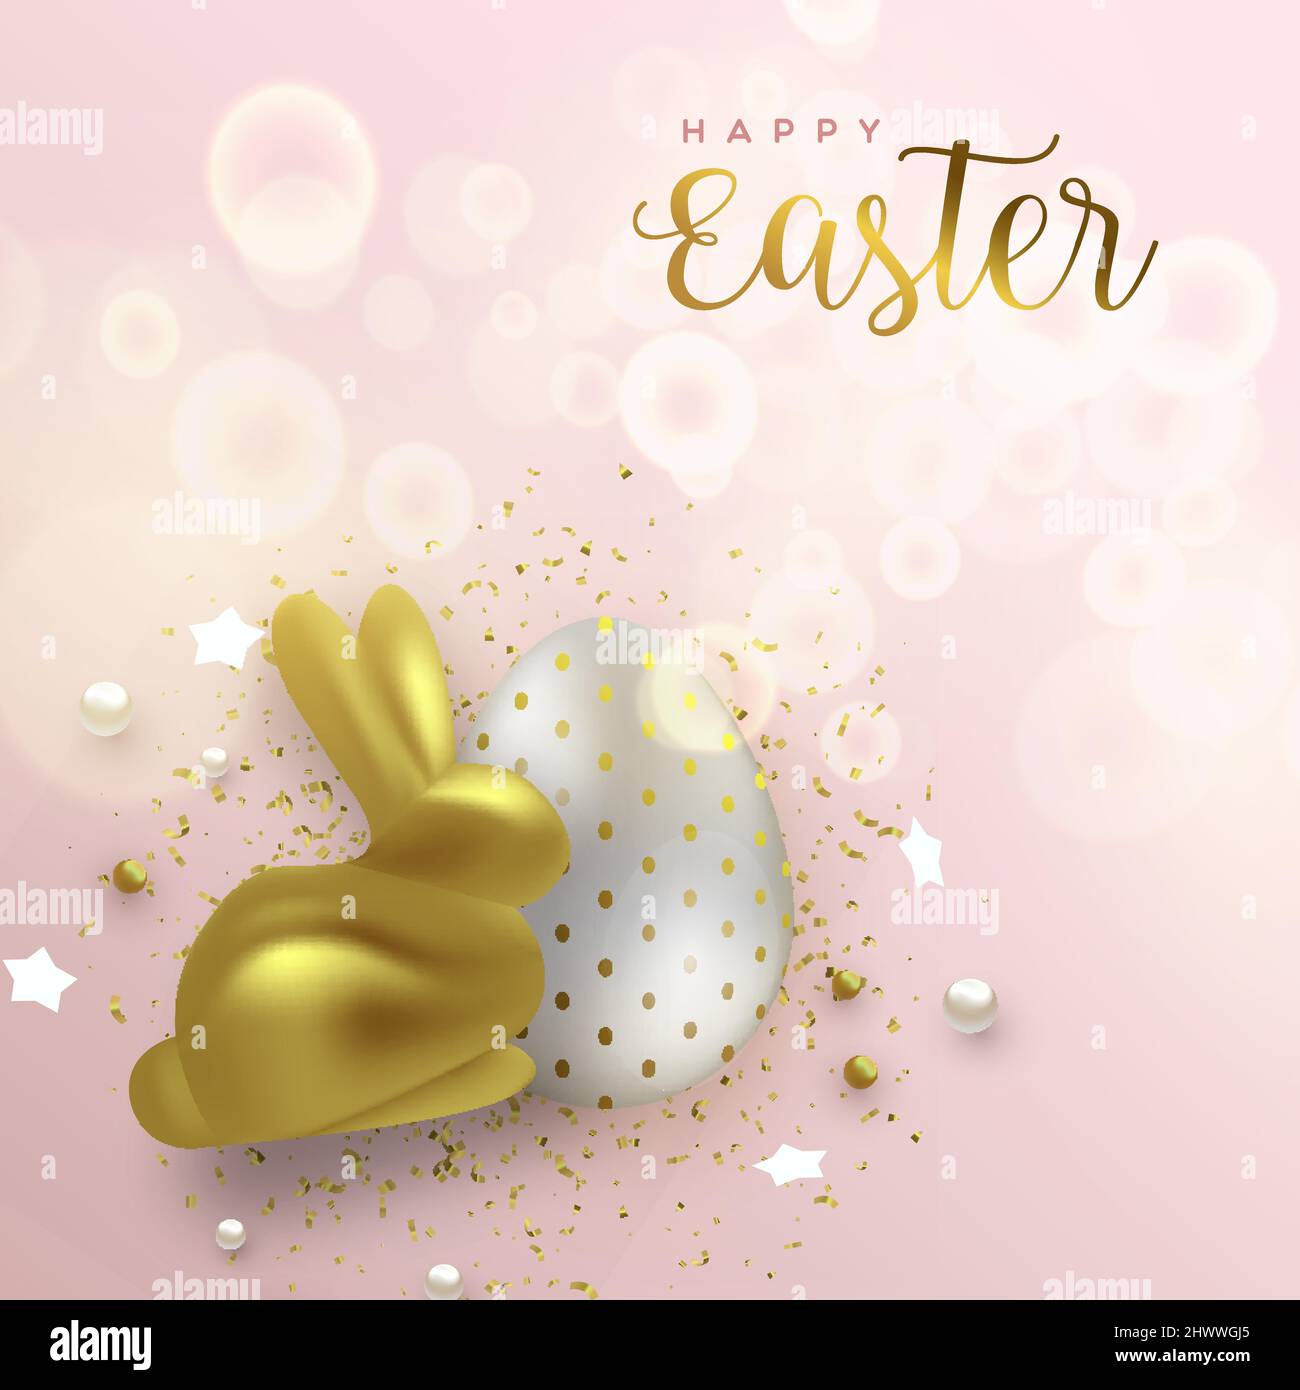 Happy Easter luxury greeting card illustration. Realistic 3d gold rabbit with egg for traditional spring holiday celebration event. Stock Vector